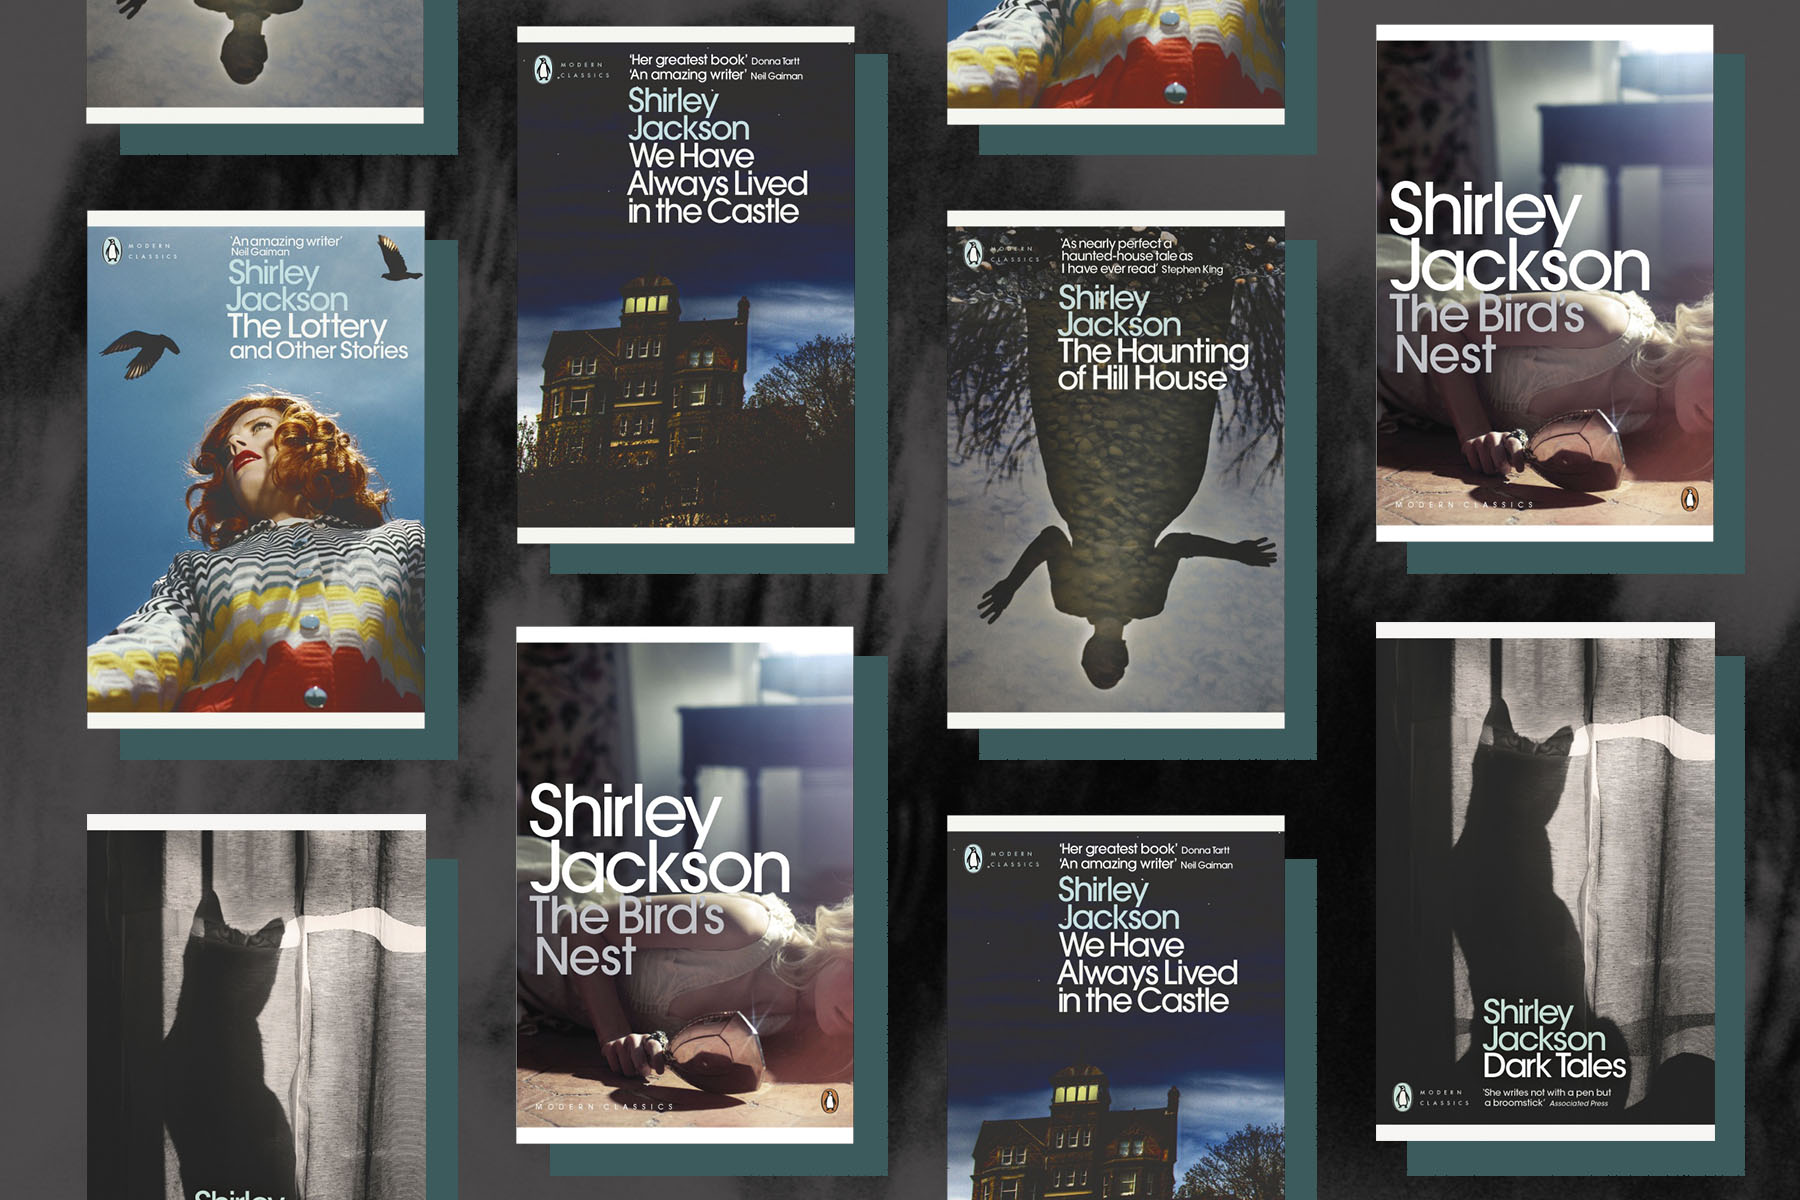 Covers of Shirley Jackson's books, including The Haunting of Hill House and We Have Always Lived in the Castle. Image by Ryan MacEachern/Penguin